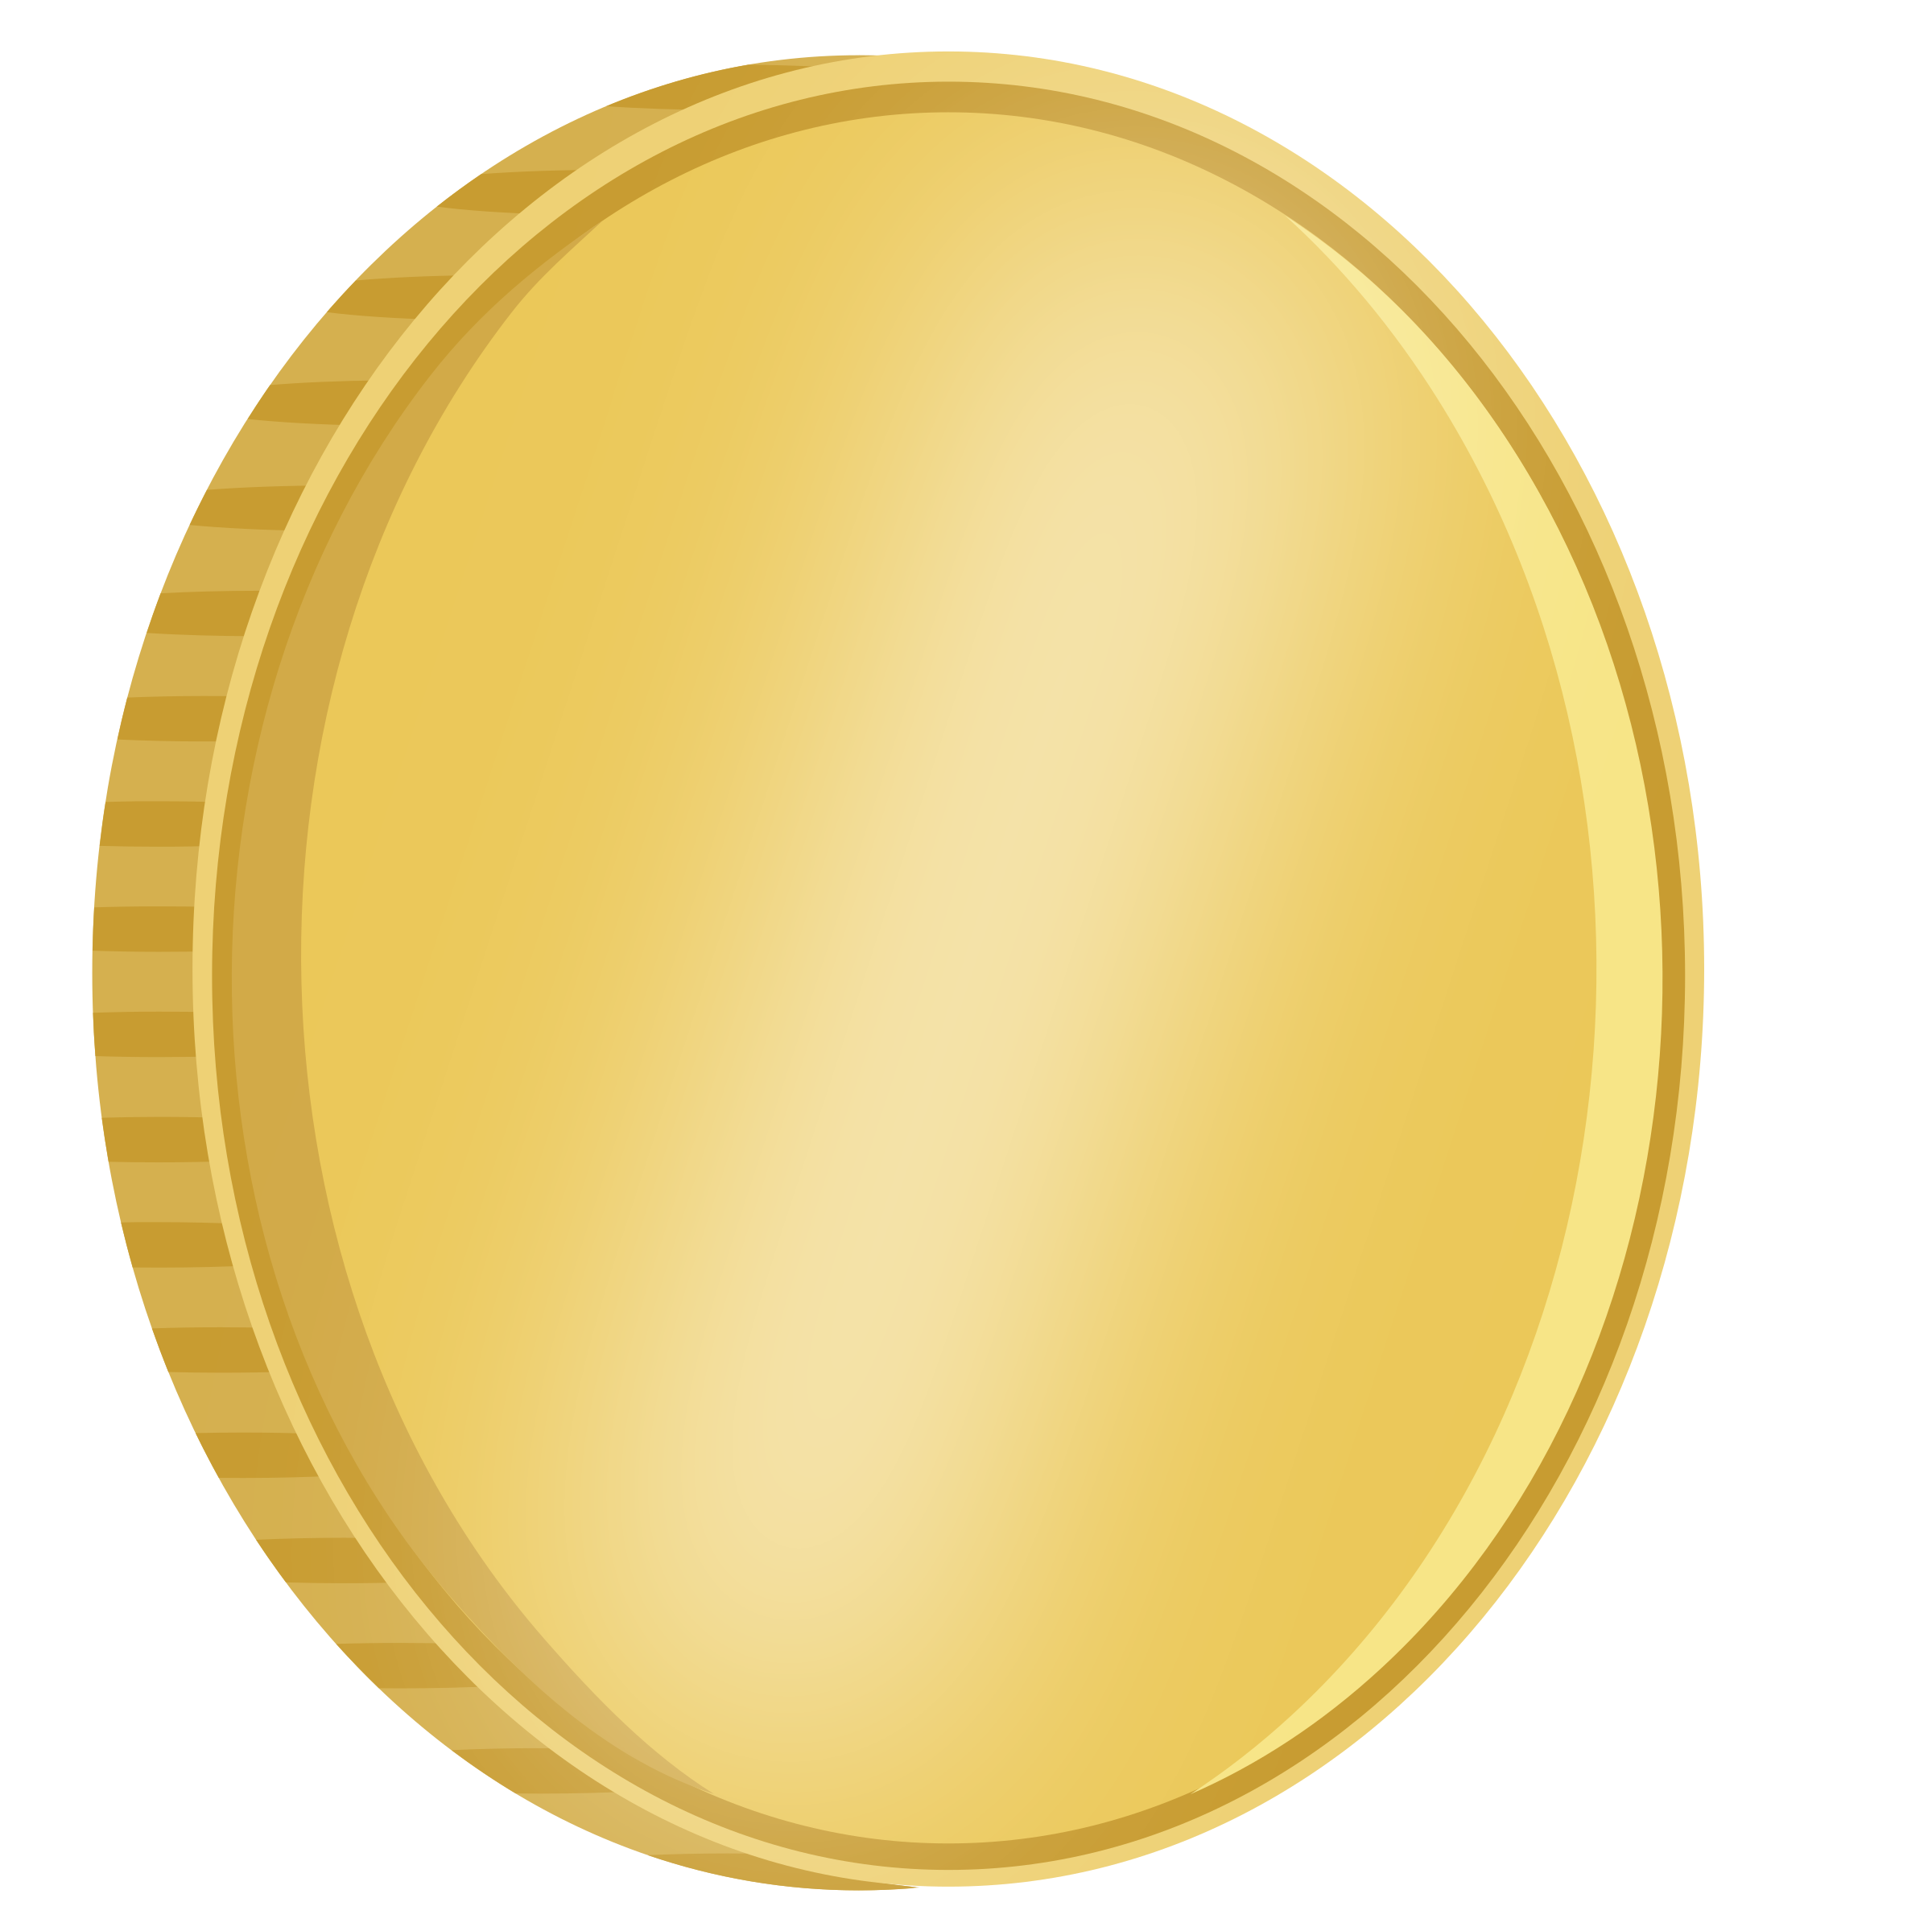 Pile of coins picture clipart